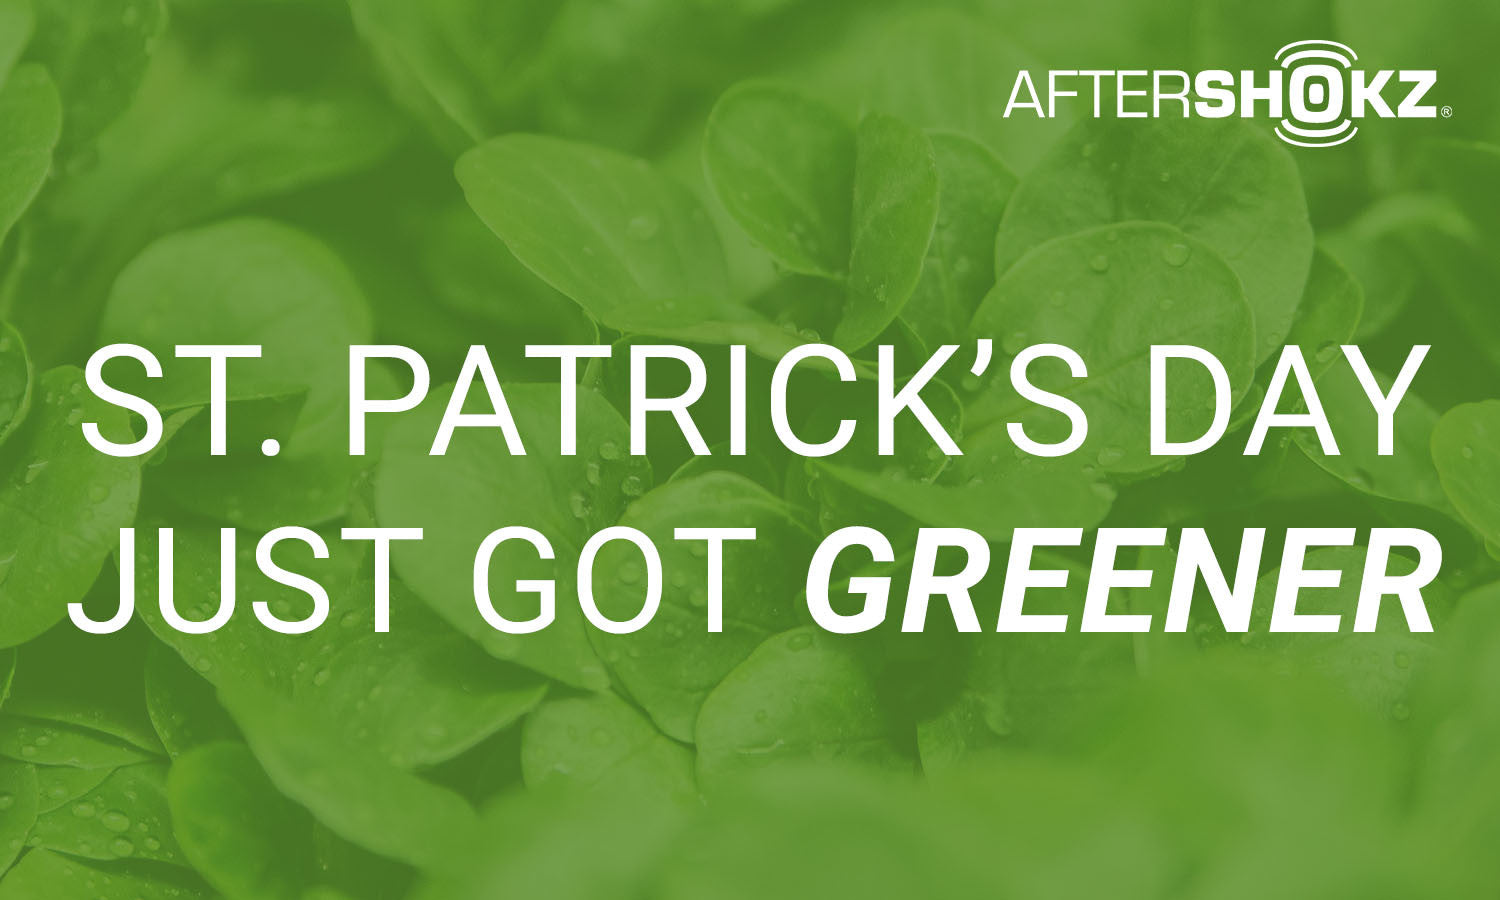 Try These Healthy Recipes For St. Patrick's Day